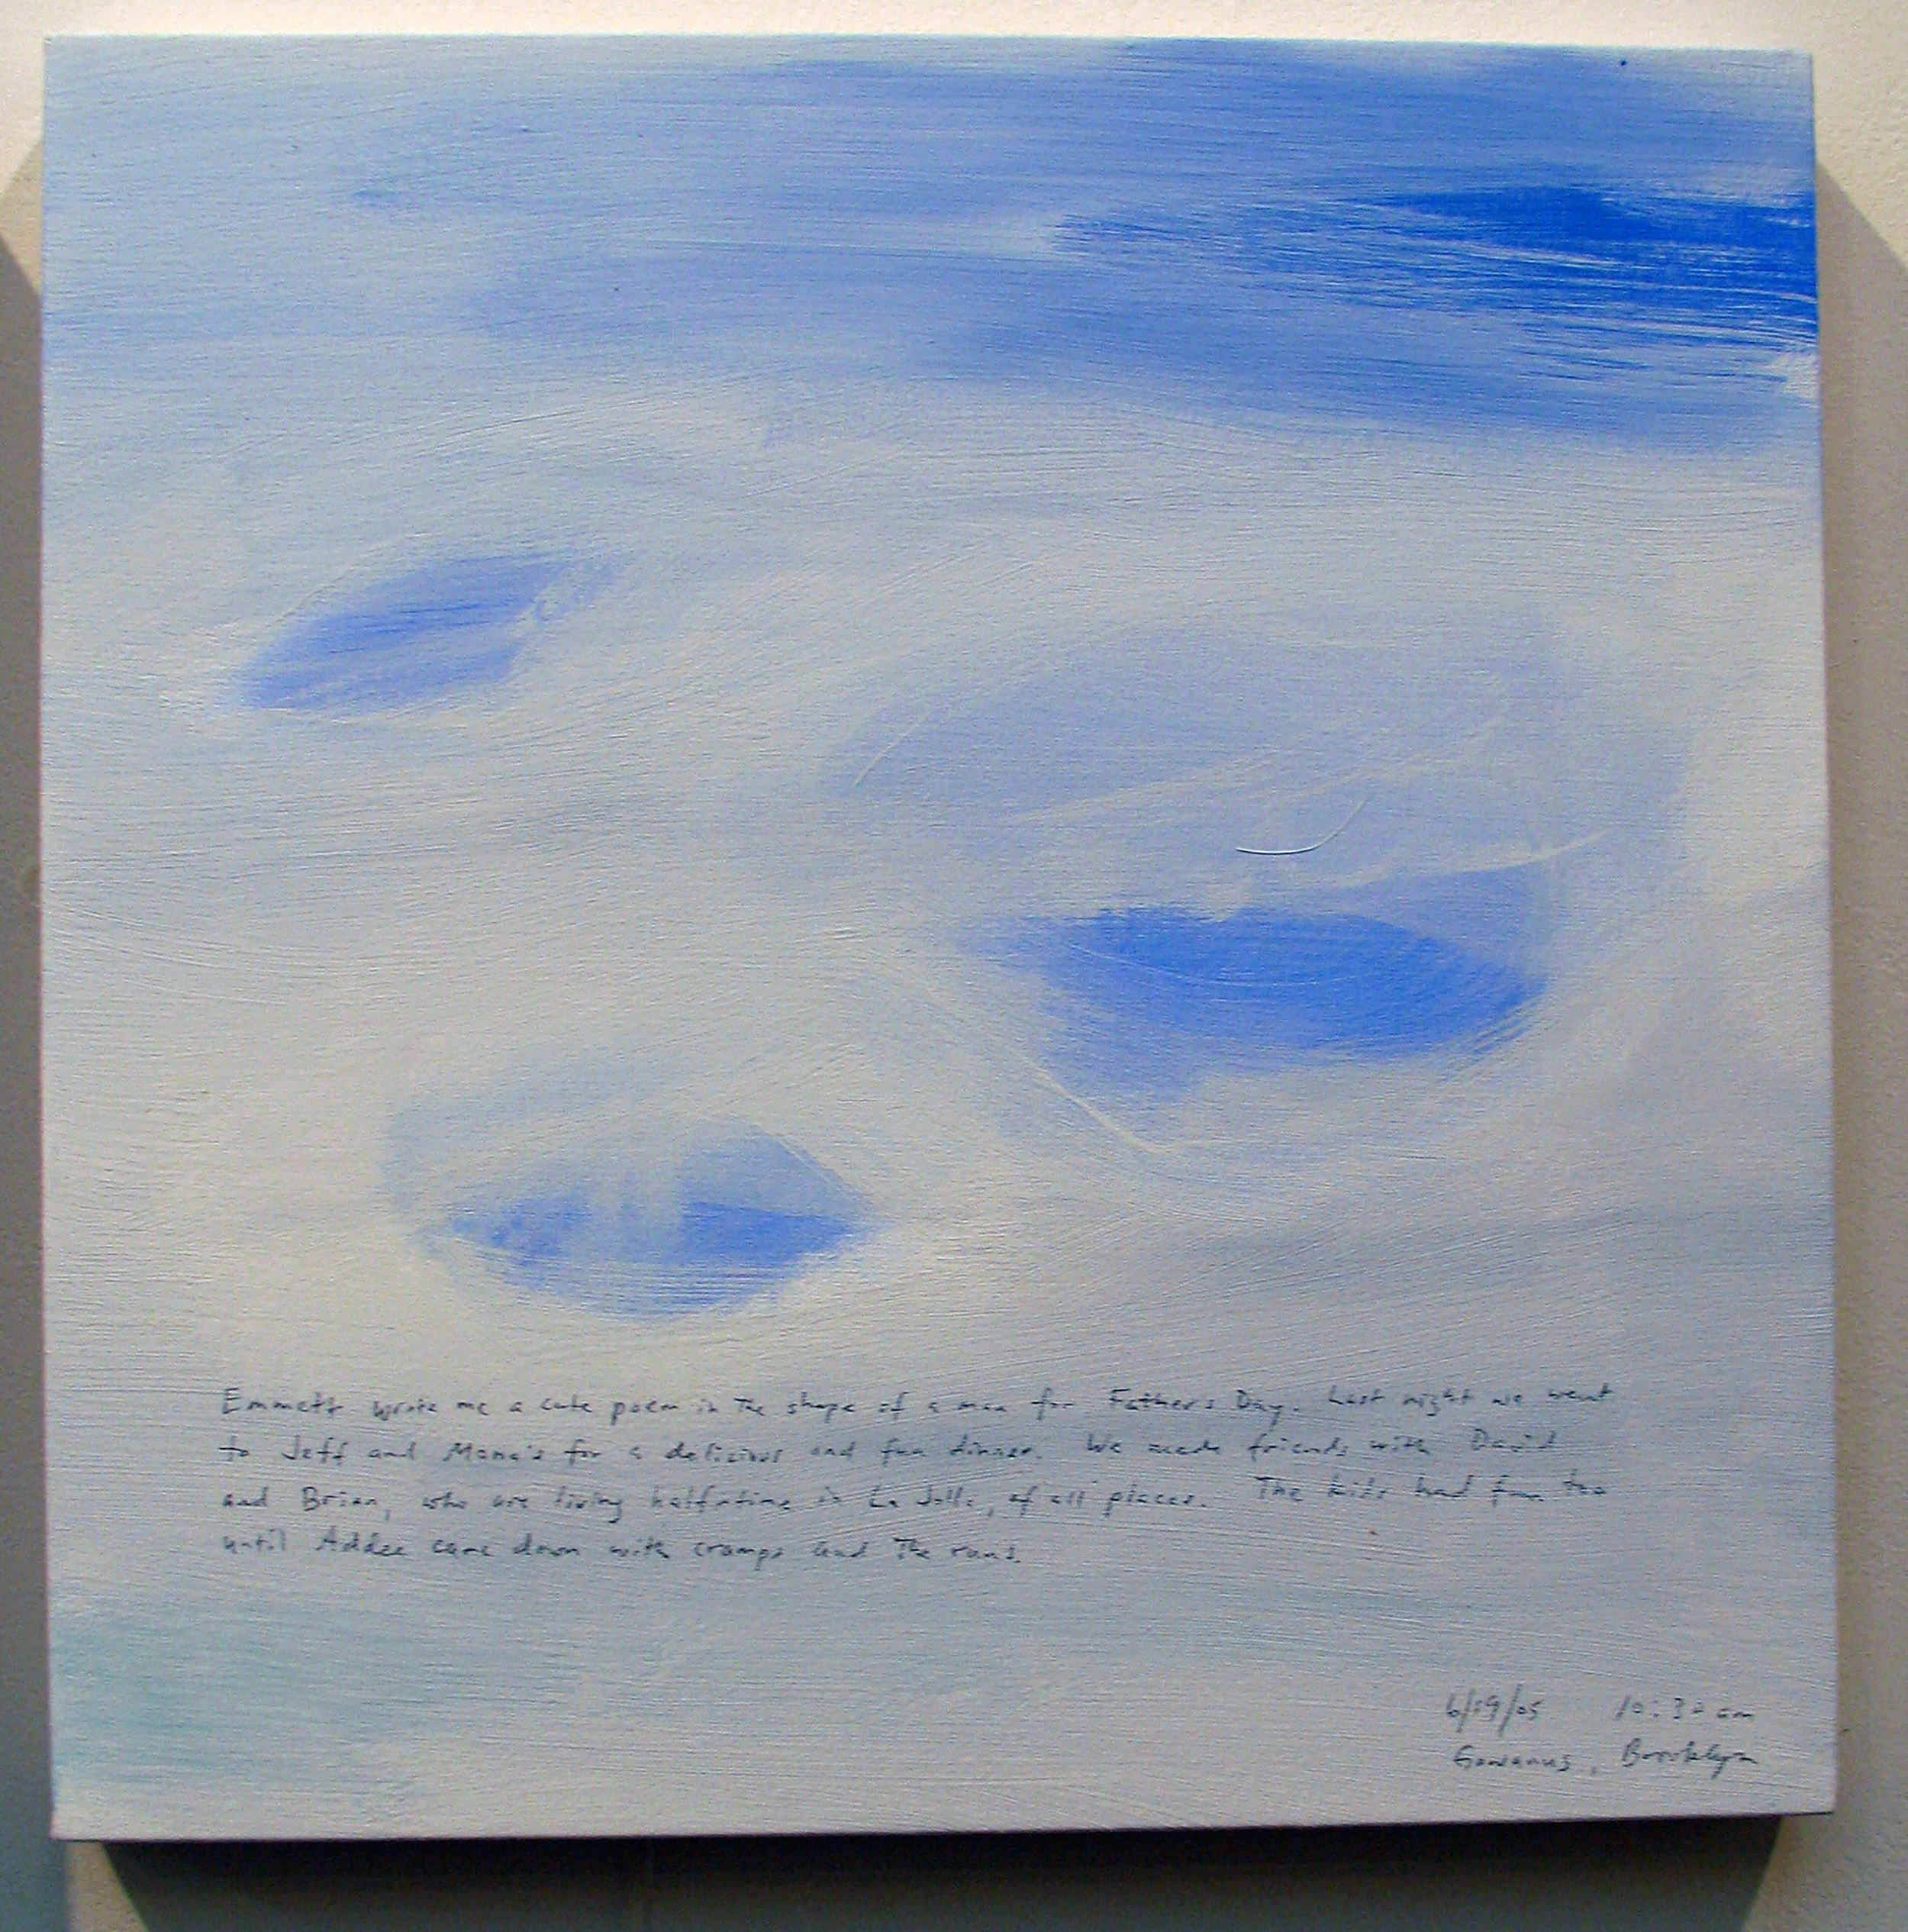 A 14 × 14 inch, acrylic painting of the sky. A journal entry is handwritten on the painting:

“Emmett wrote me a cute poem in the shape of a man for Fathers Day. Last night we went to Jeff and Mona’s for a delicious and fun dinner. We made friends with David and Brian, who are living halftime in La Jolla, of all places. The kids had fun too until Addee came down with cramps and the runs.  

6/19/05 10:30 am
Gowanus, Brooklyn”